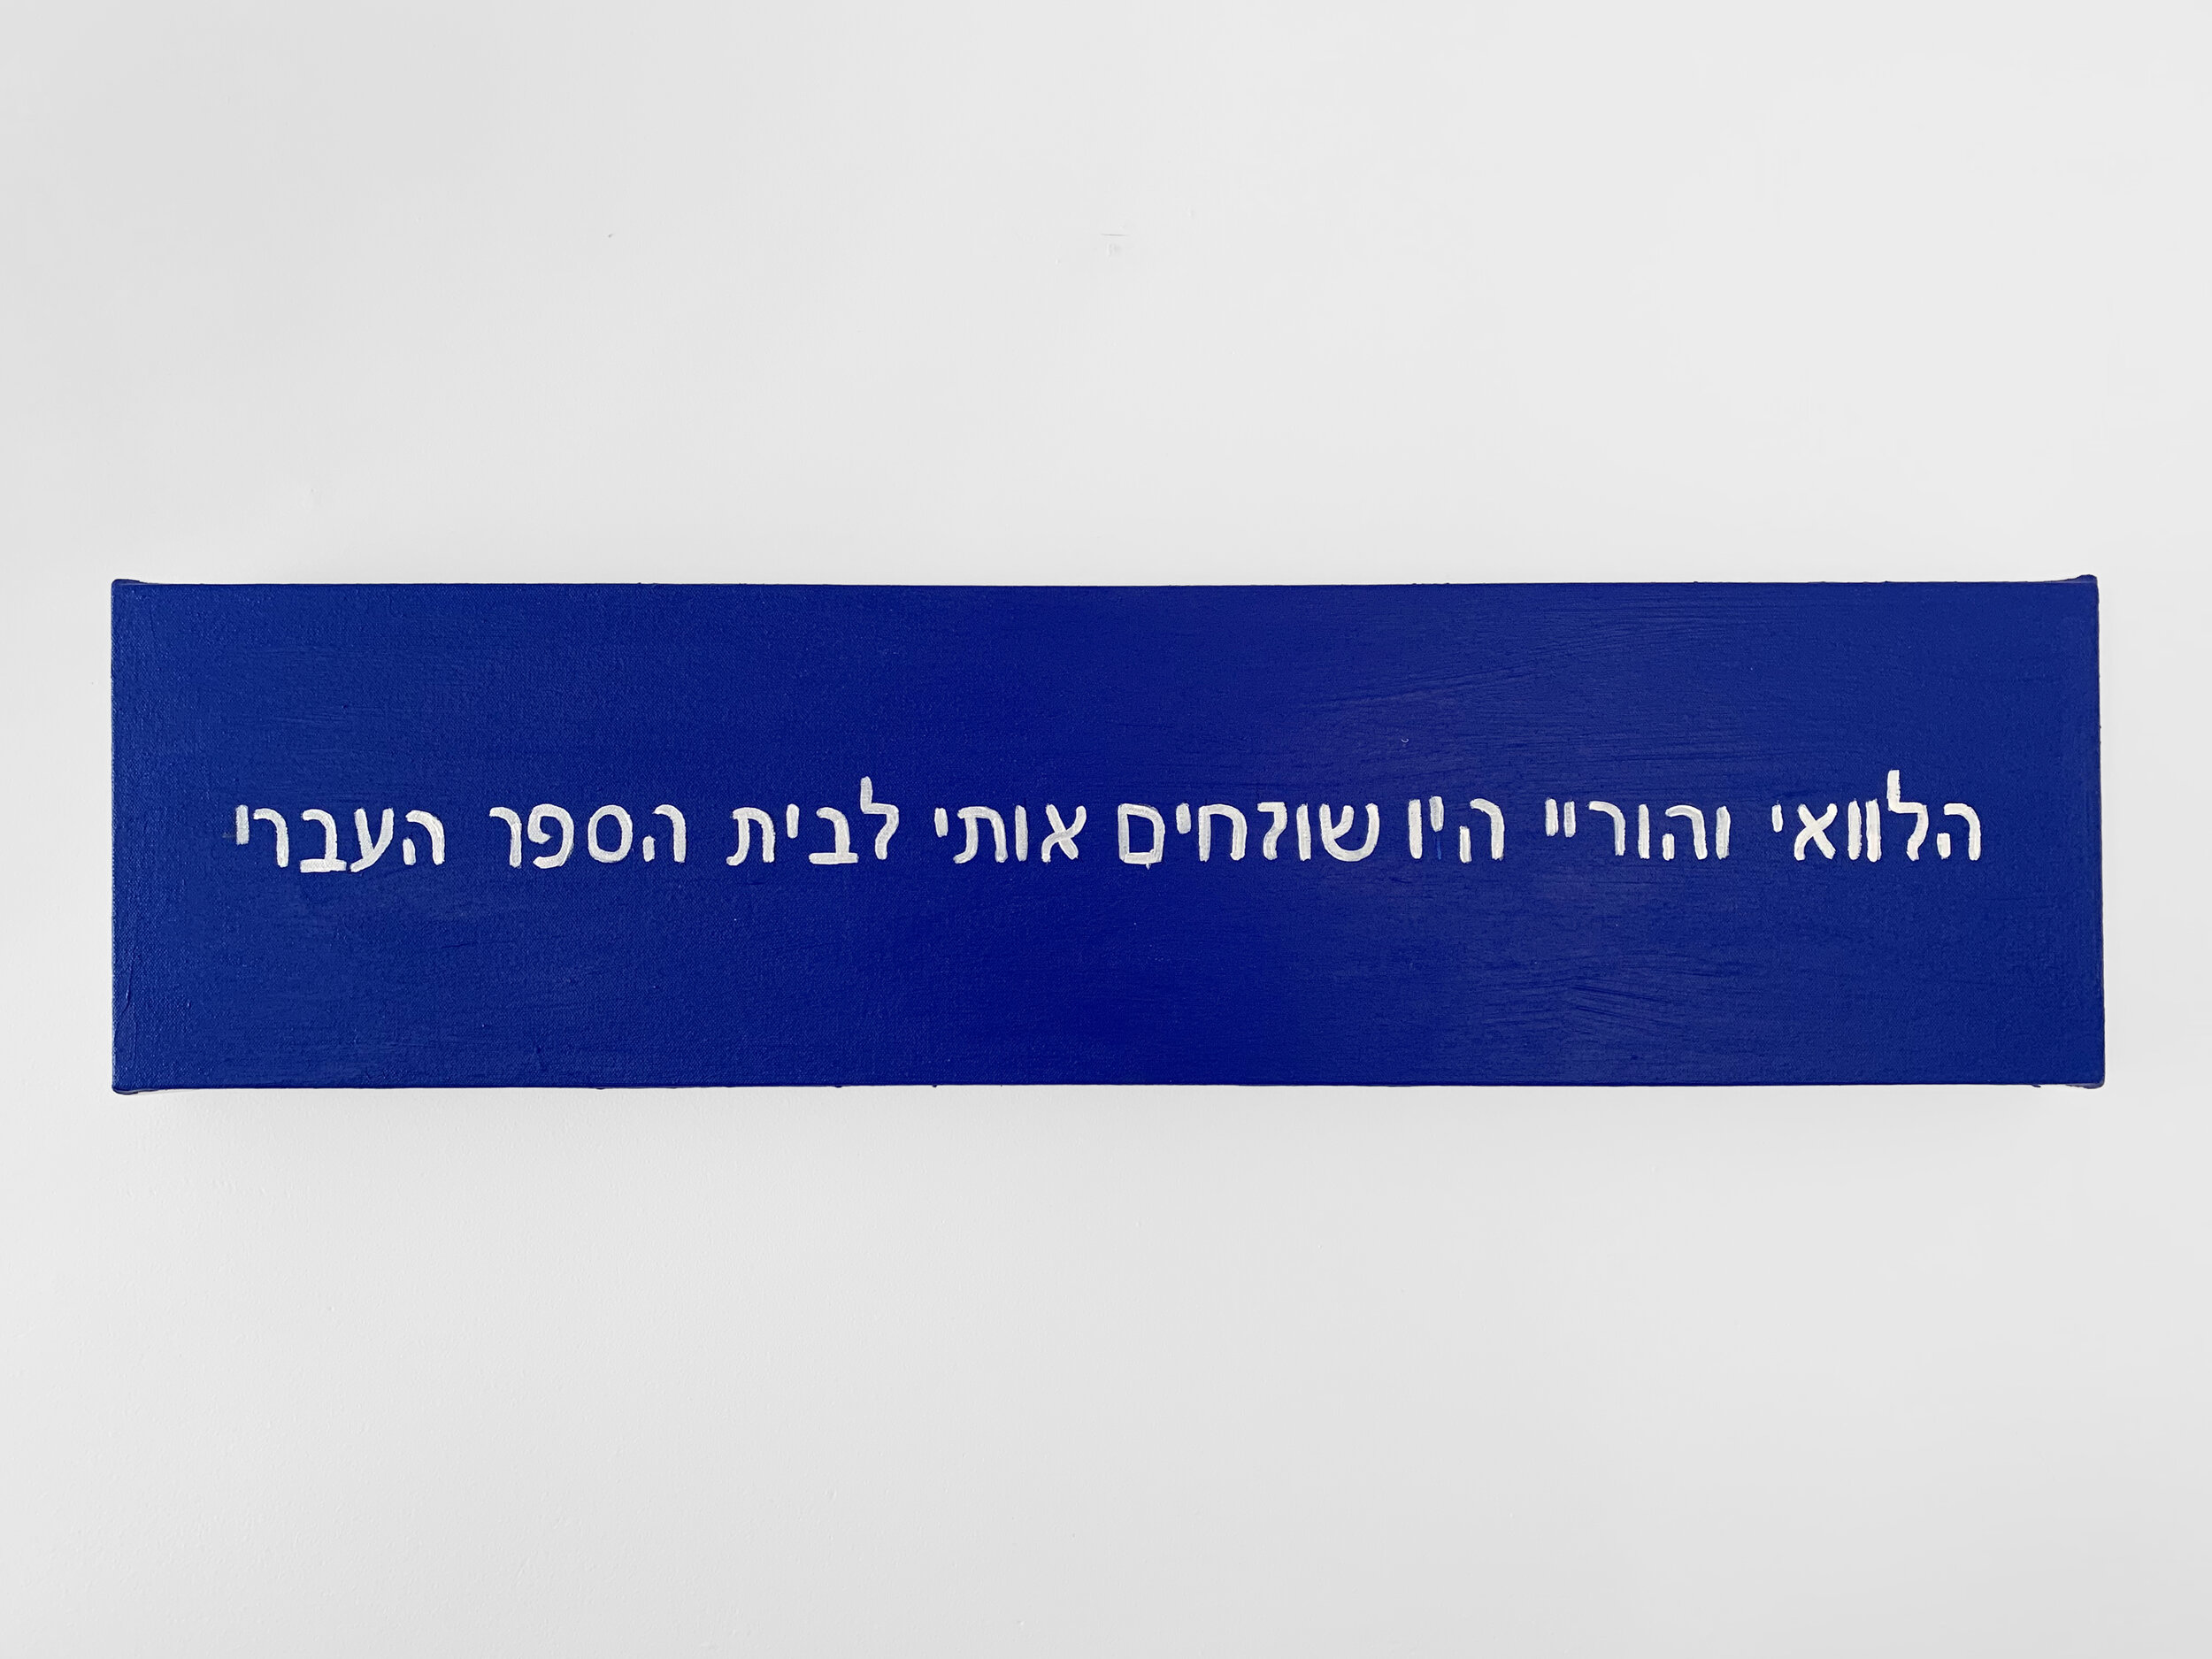   The Thoughts In My Head #95 (I wish my parents had sent me to Hebrew school),  2020. Acrylic on canvas, 8 x 32 inches. 